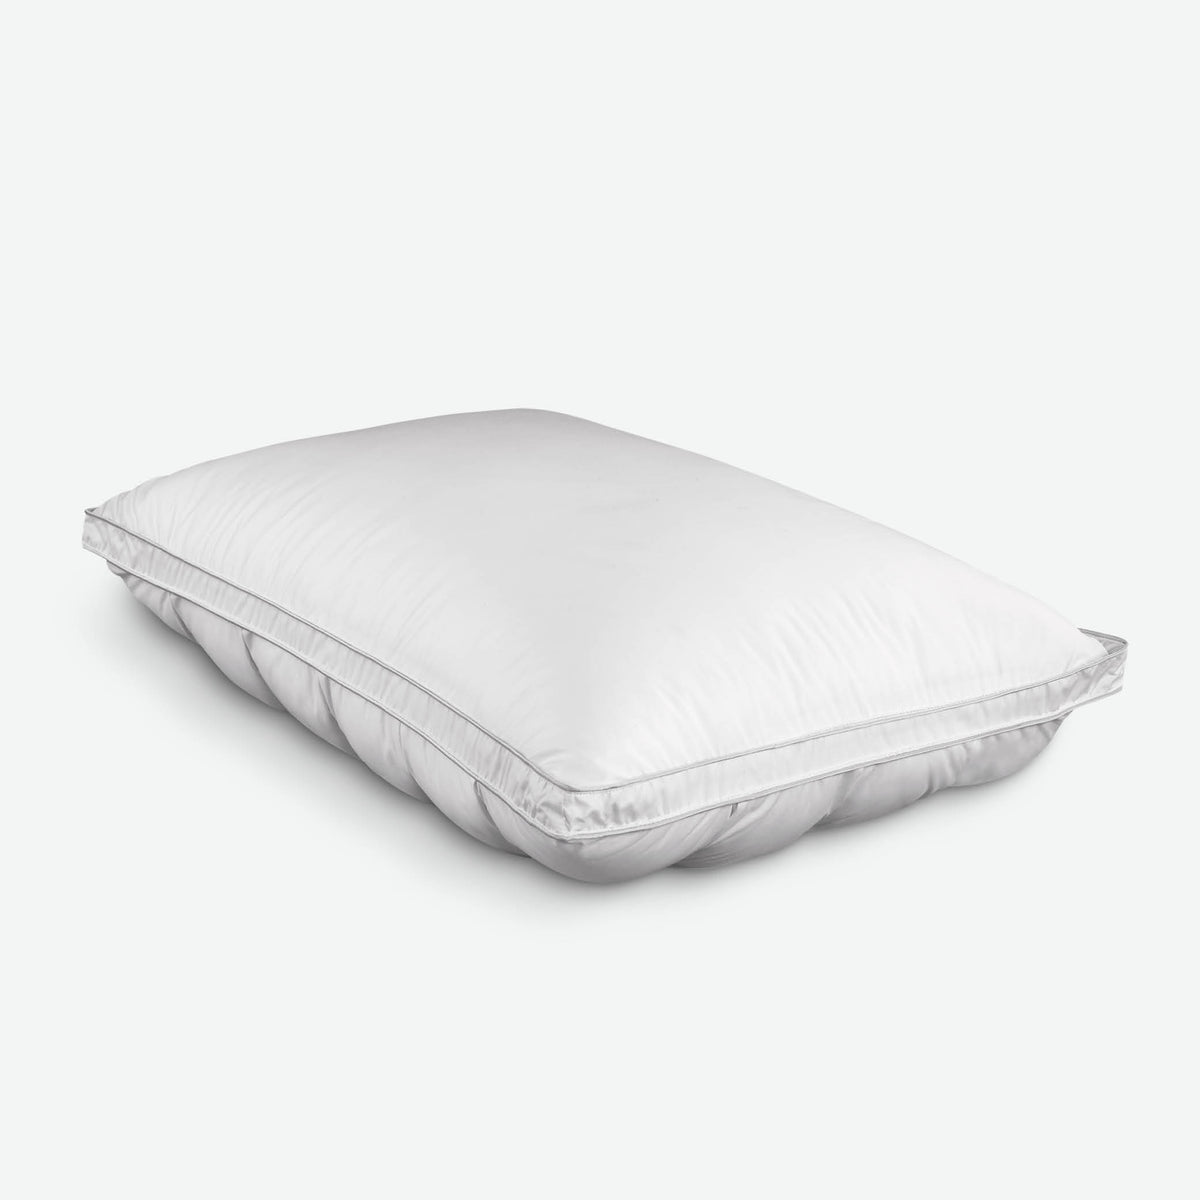 Image of the SoftCell® Lite Pillow with the traditional side facing up on a white background